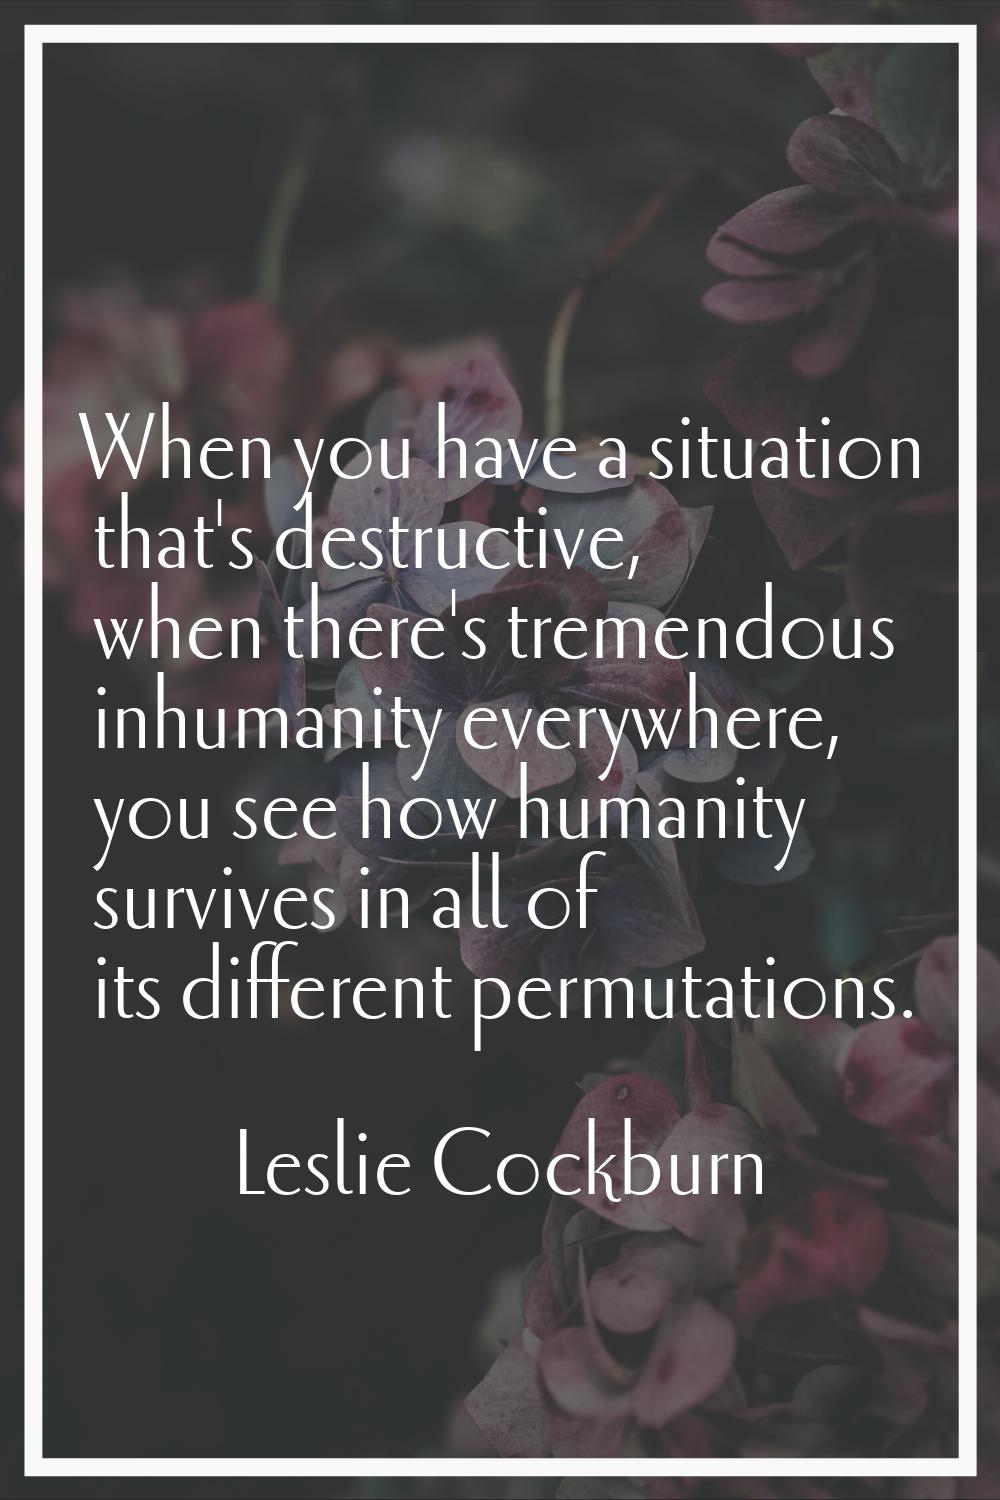 When you have a situation that's destructive, when there's tremendous inhumanity everywhere, you se